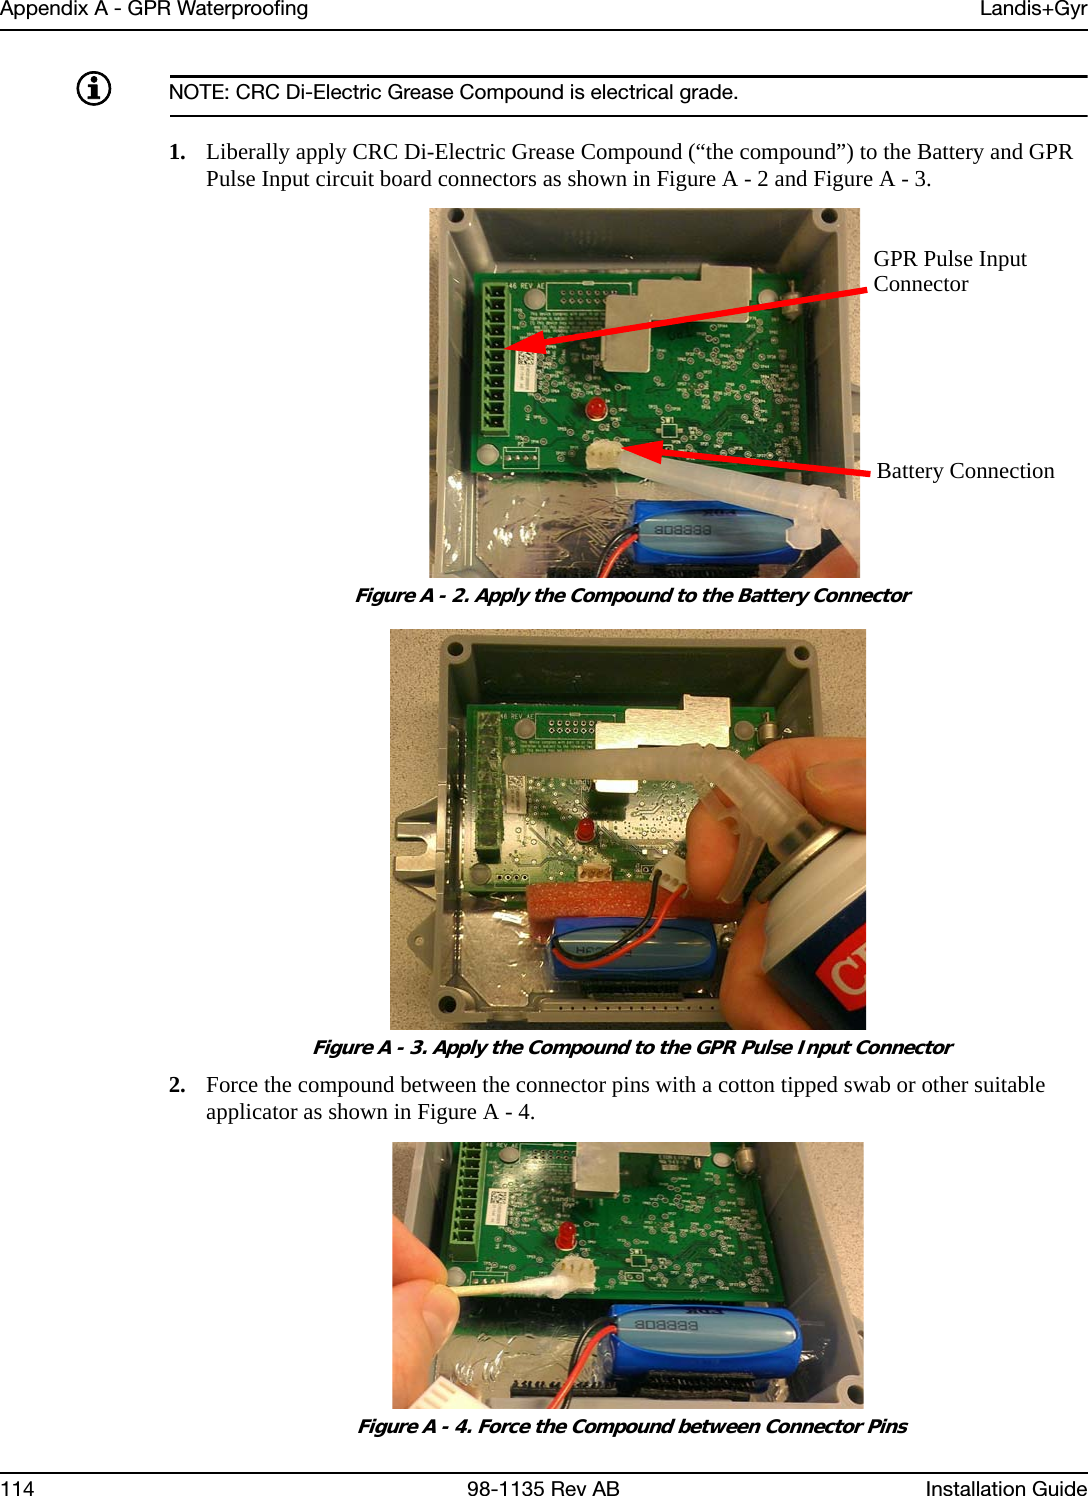 Appendix A - GPR Waterproofing Landis+Gyr114 98-1135 Rev AB Installation GuideNOTE: CRC Di-Electric Grease Compound is electrical grade.1. Liberally apply CRC Di-Electric Grease Compound (“the compound”) to the Battery and GPR Pulse Input circuit board connectors as shown in Figure A - 2 and Figure A - 3. Figure A - 2. Apply the Compound to the Battery Connector Figure A - 3. Apply the Compound to the GPR Pulse Input Connector2. Force the compound between the connector pins with a cotton tipped swab or other suitable applicator as shown in Figure A - 4. Figure A - 4. Force the Compound between Connector PinsGPR Pulse InputConnectorBattery Connection